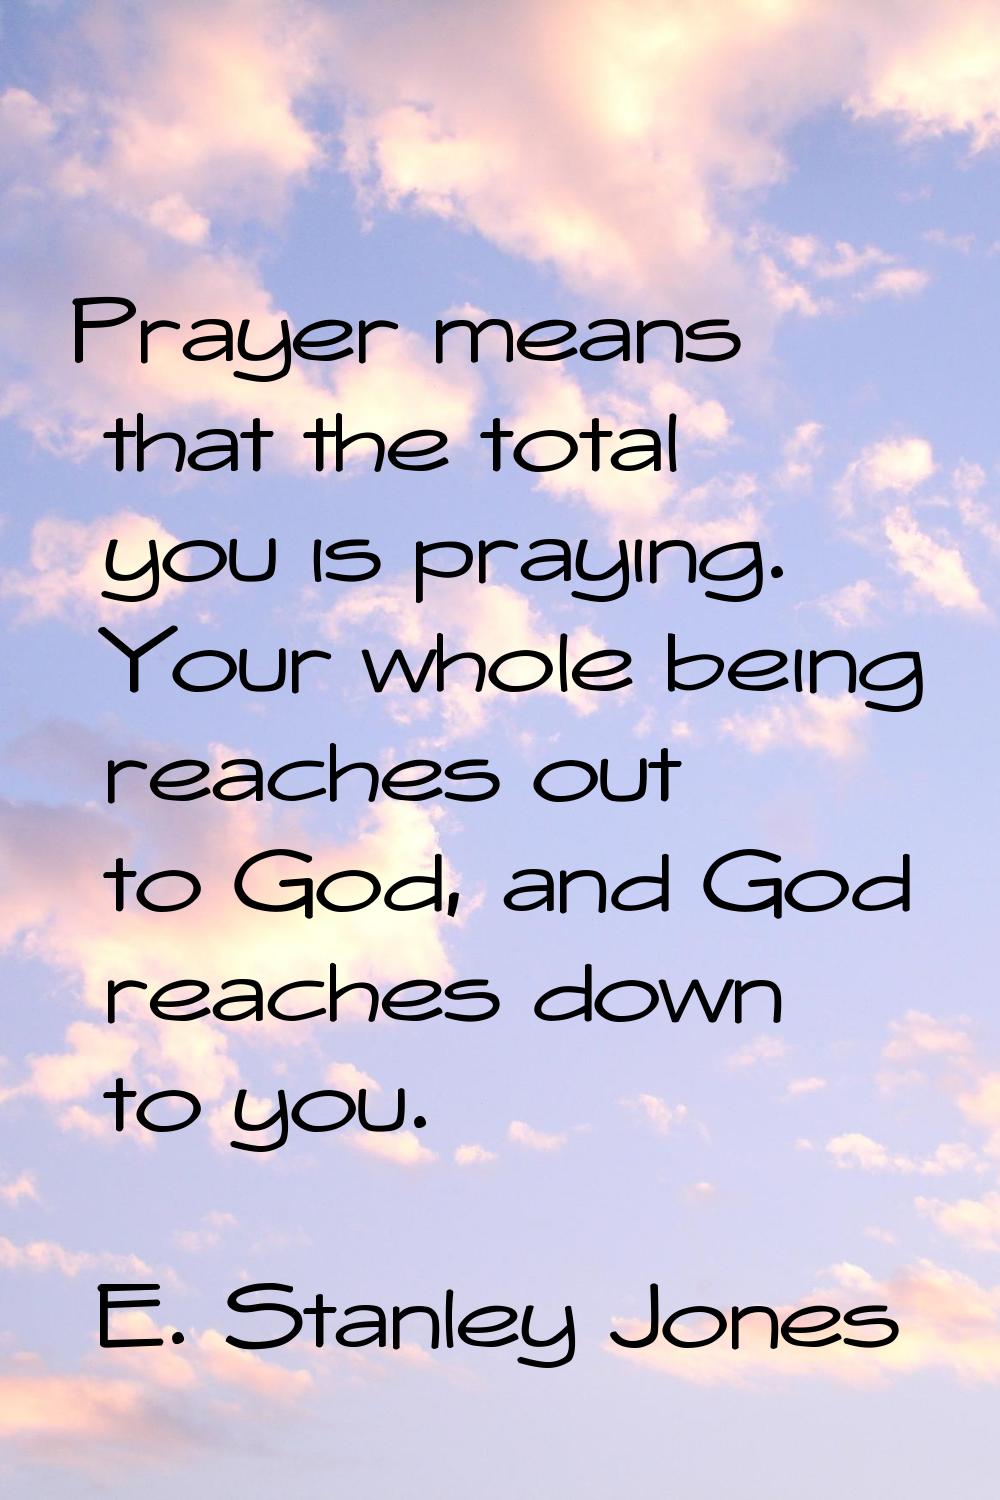 Prayer means that the total you is praying. Your whole being reaches out to God, and God reaches do